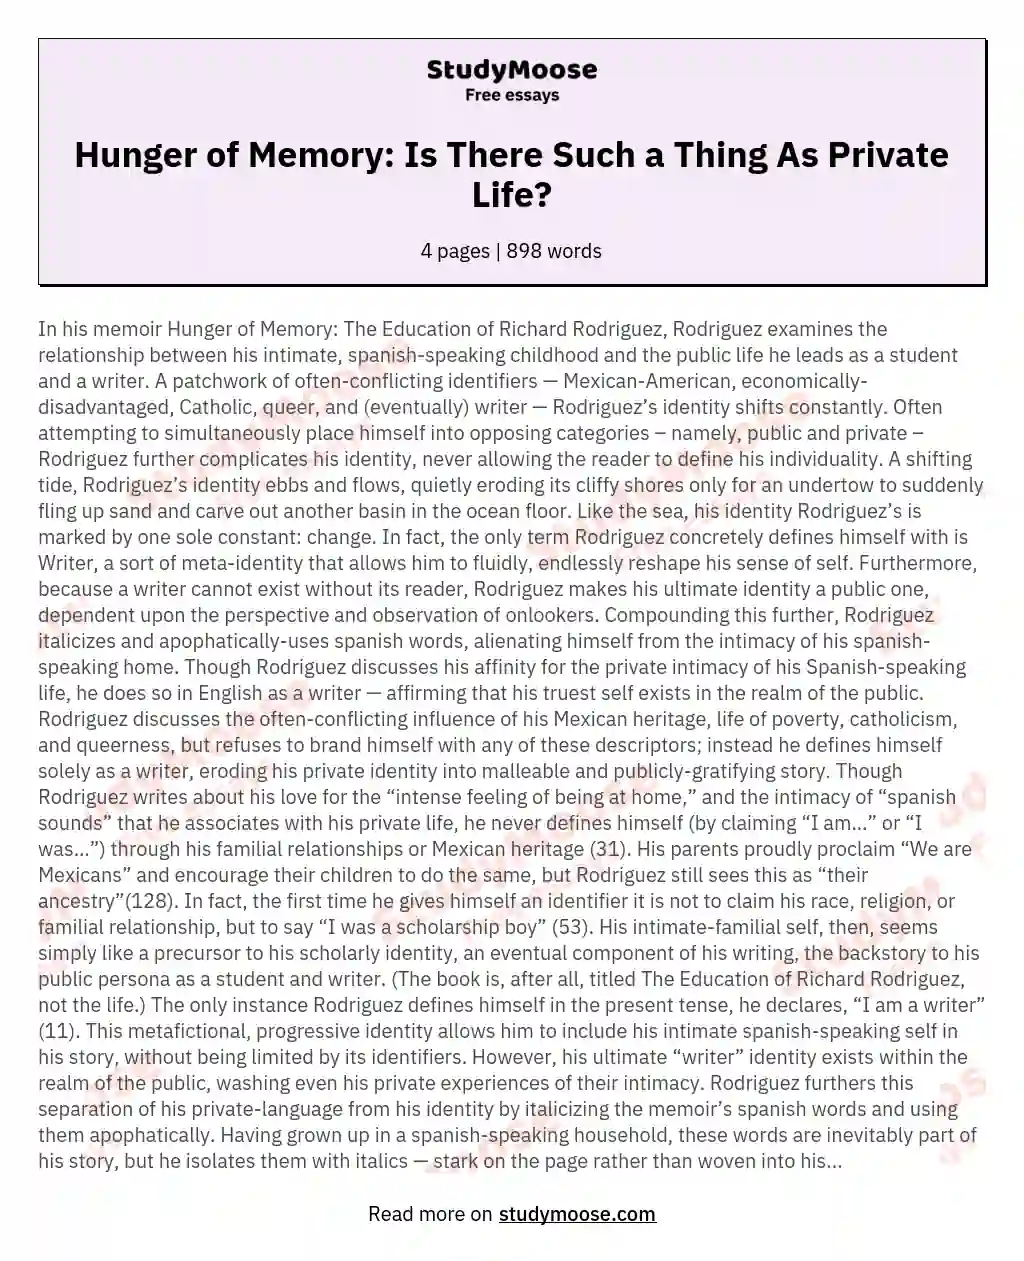 Hunger of Memory: Is There Such a Thing As Private Life?